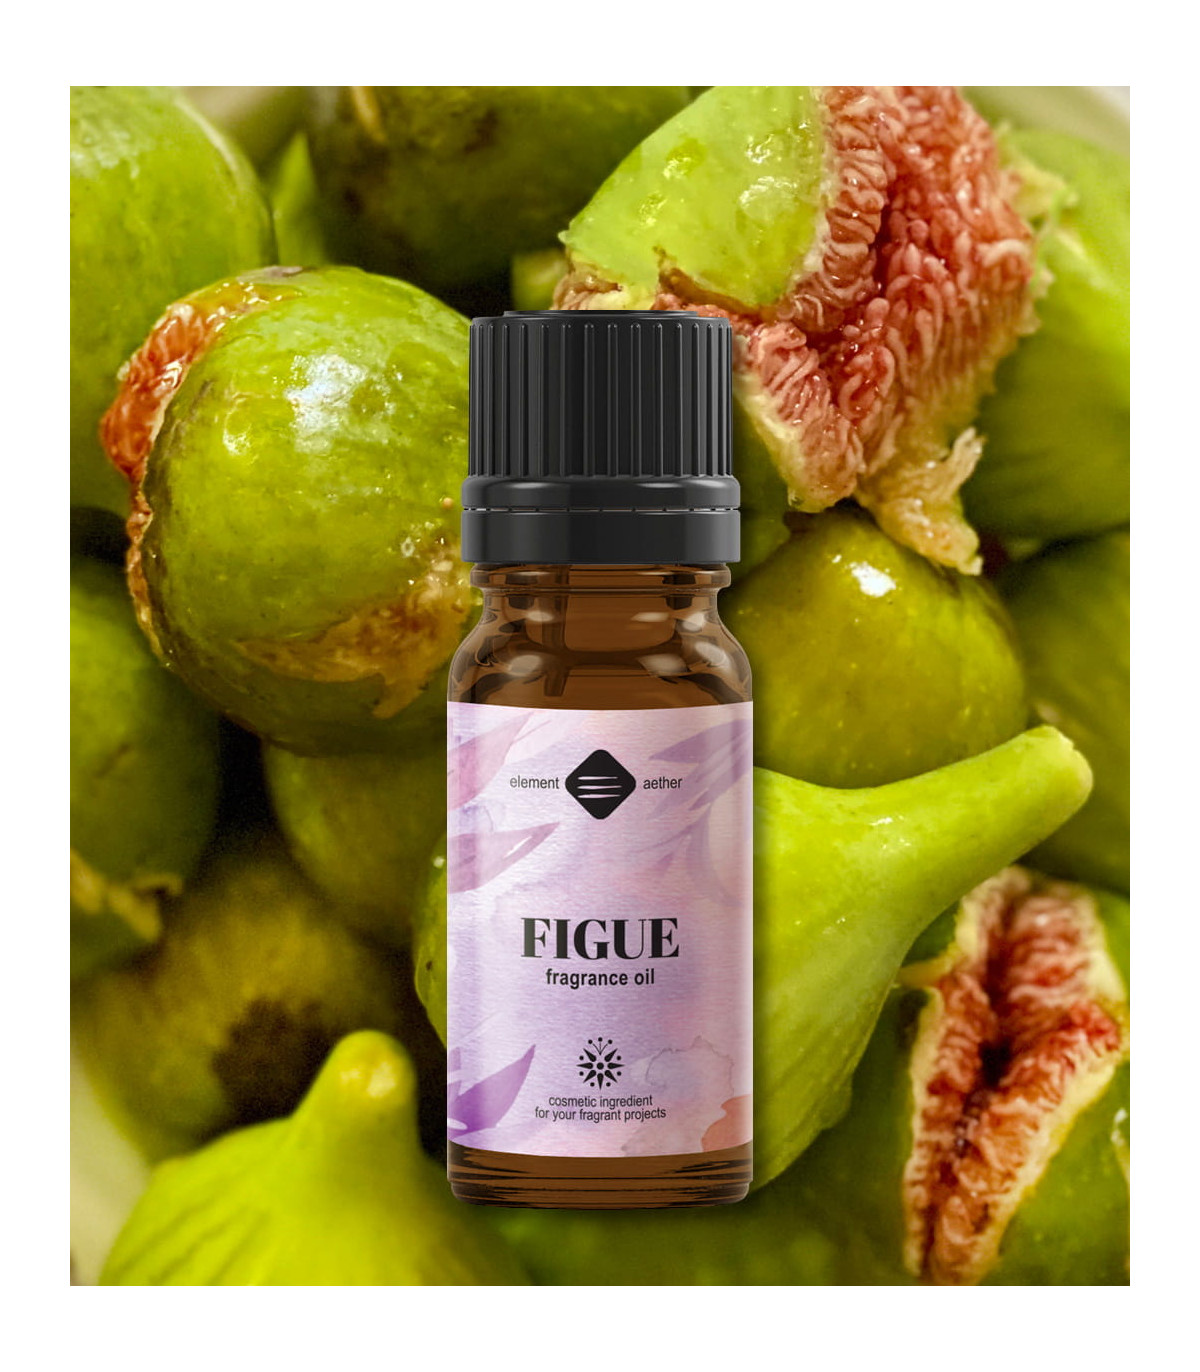 Figue Fragrance oil